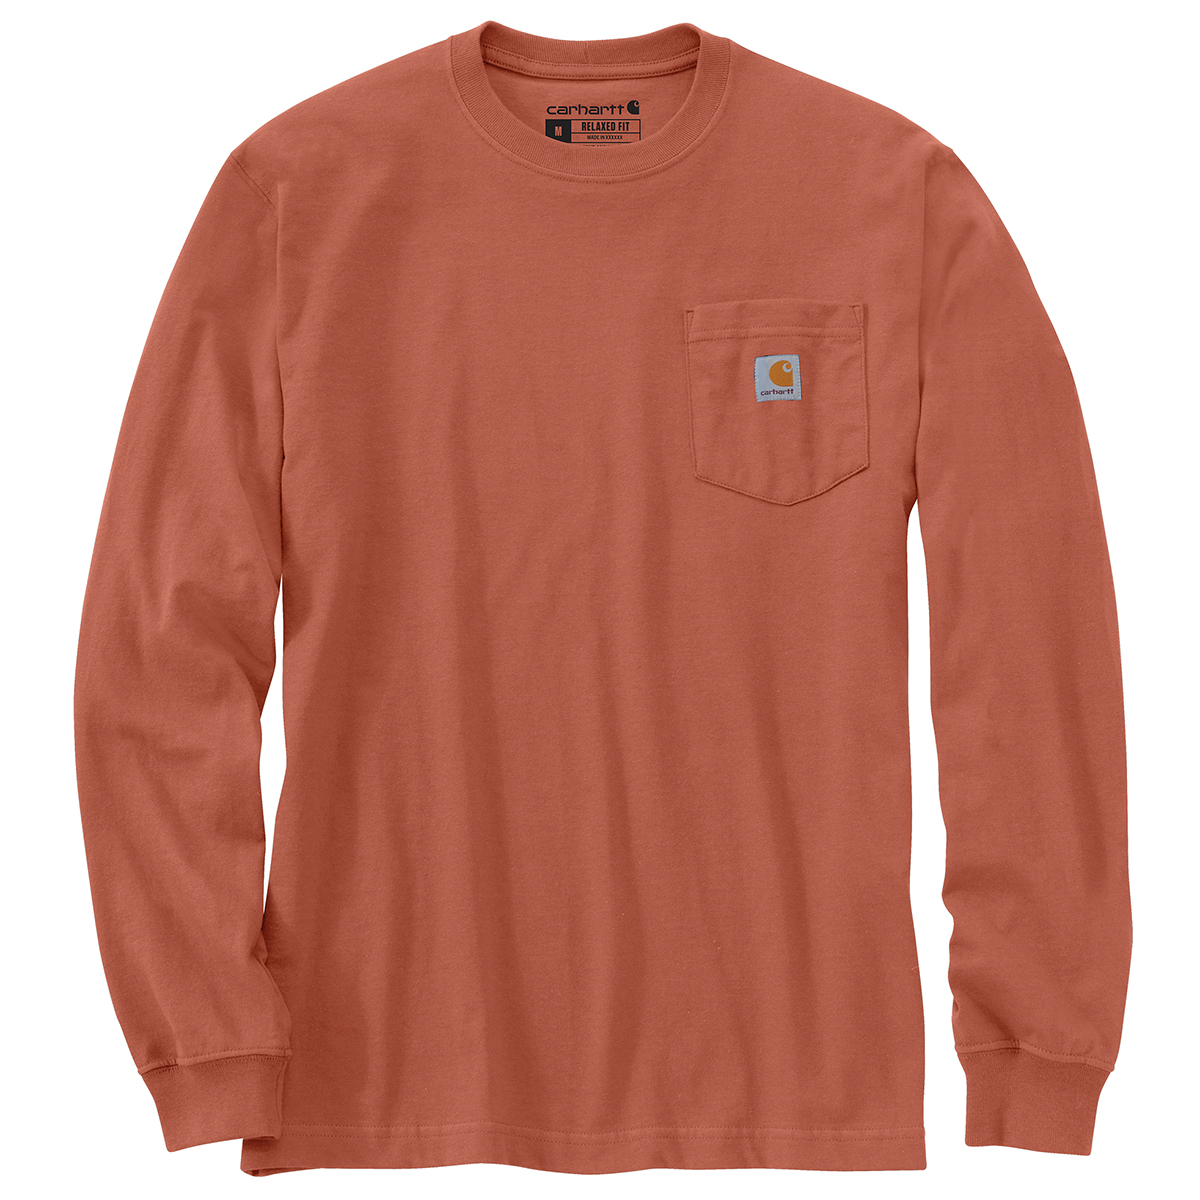 Carhartt Men's 105955 Relaxed Fit Long-Sleeve Pocket Graphic Tee